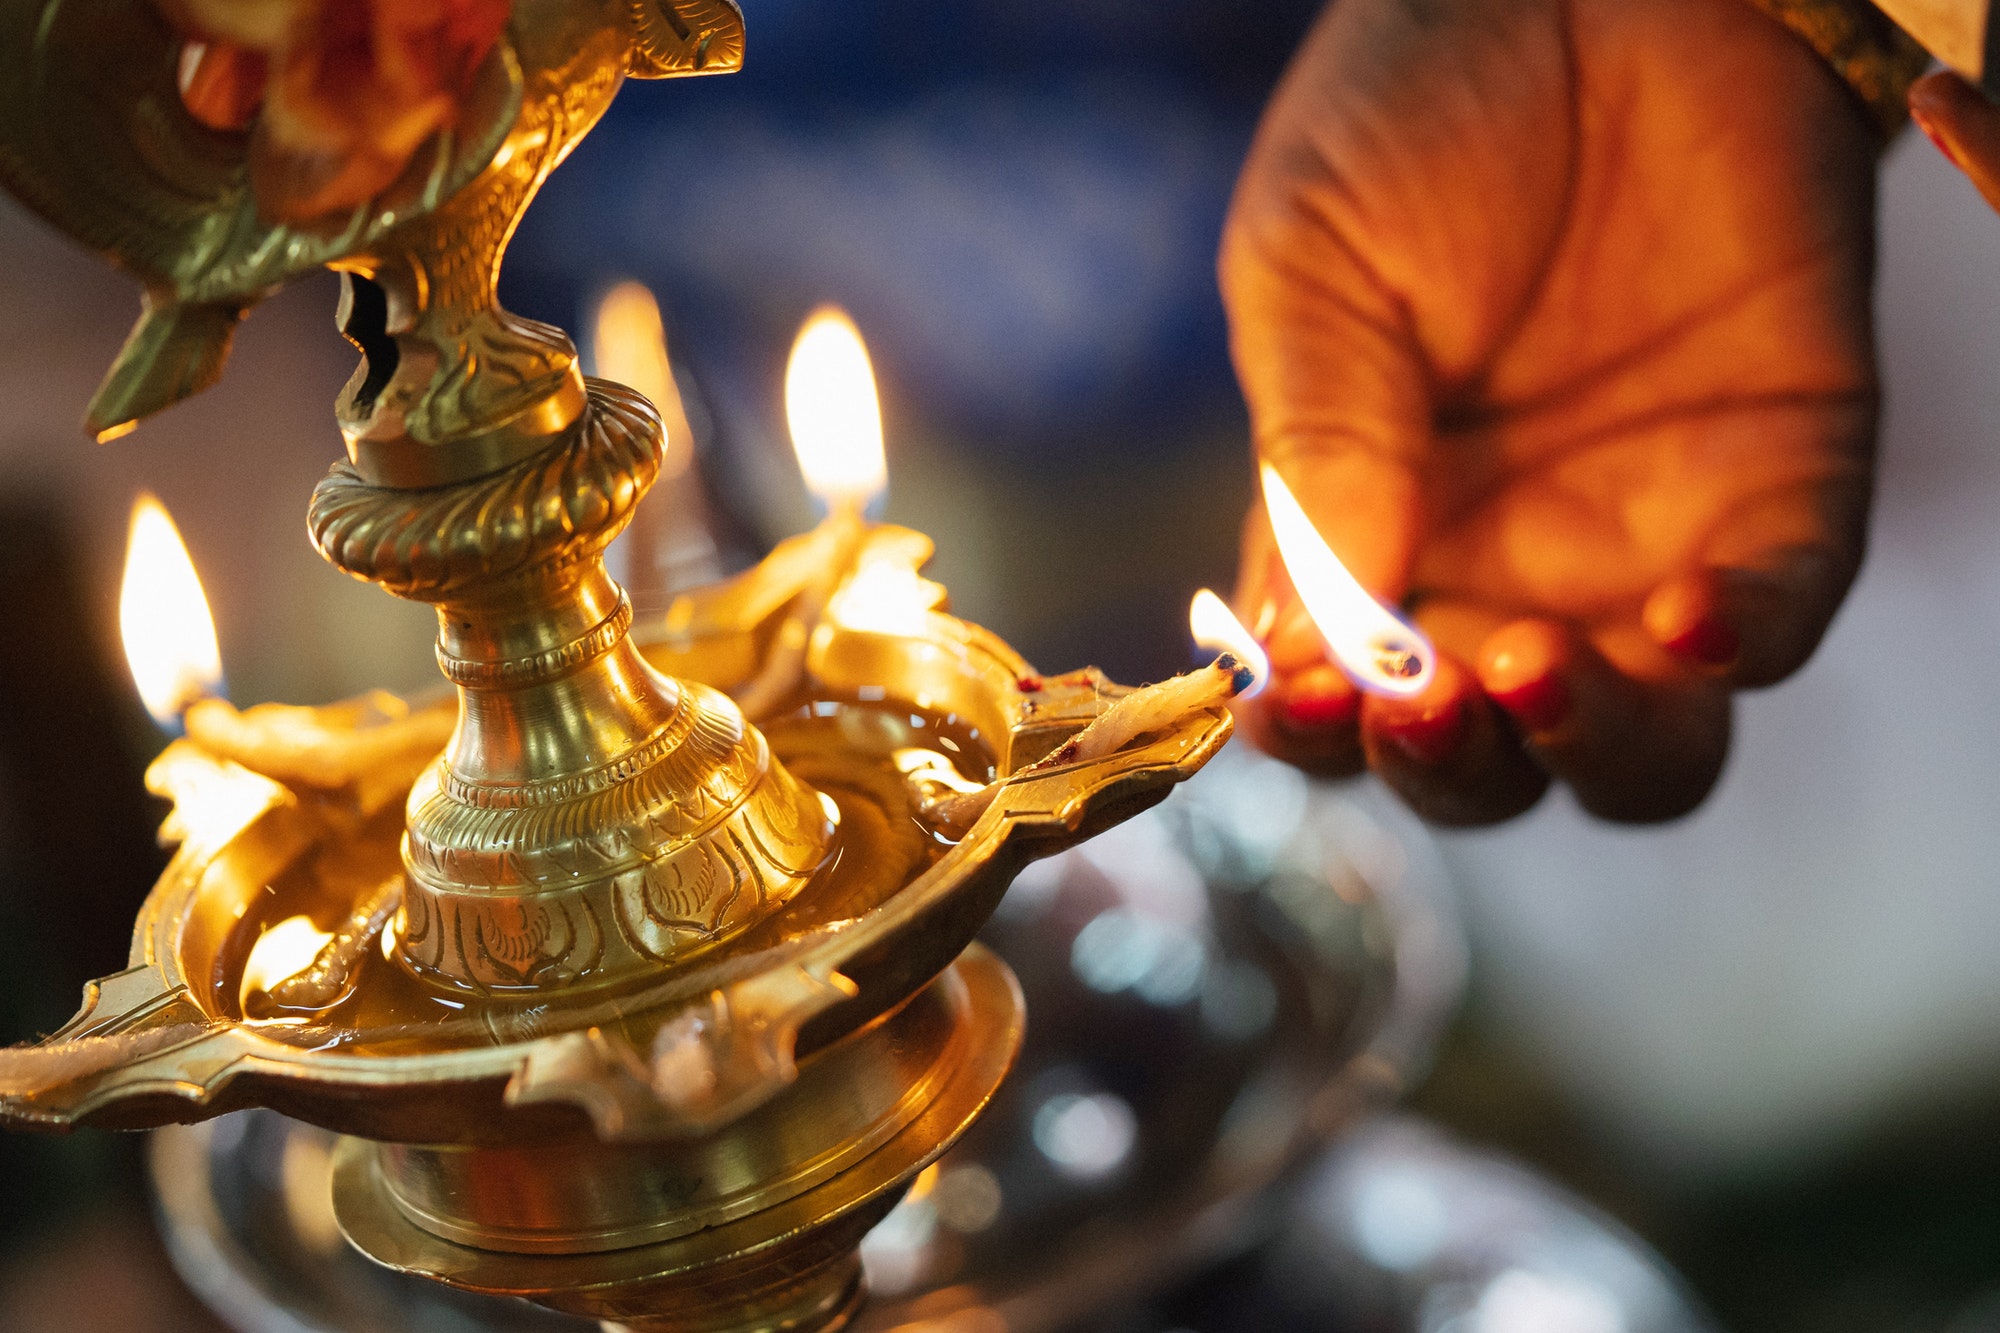 Indian women hand lighting up the lid of the traditional brass oil lamp in the south Indian wedding